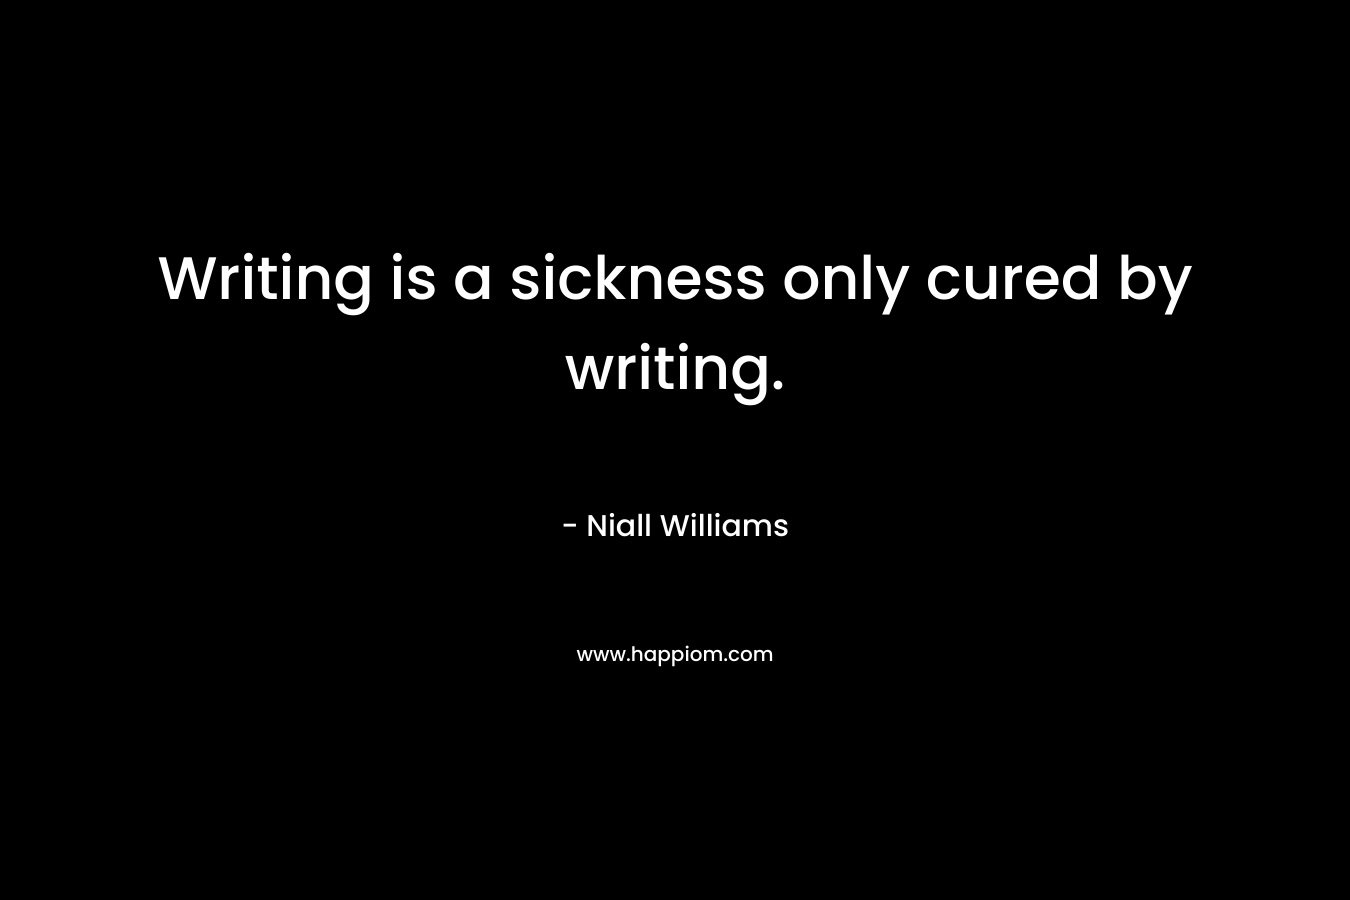 Writing is a sickness only cured by writing. – Niall Williams